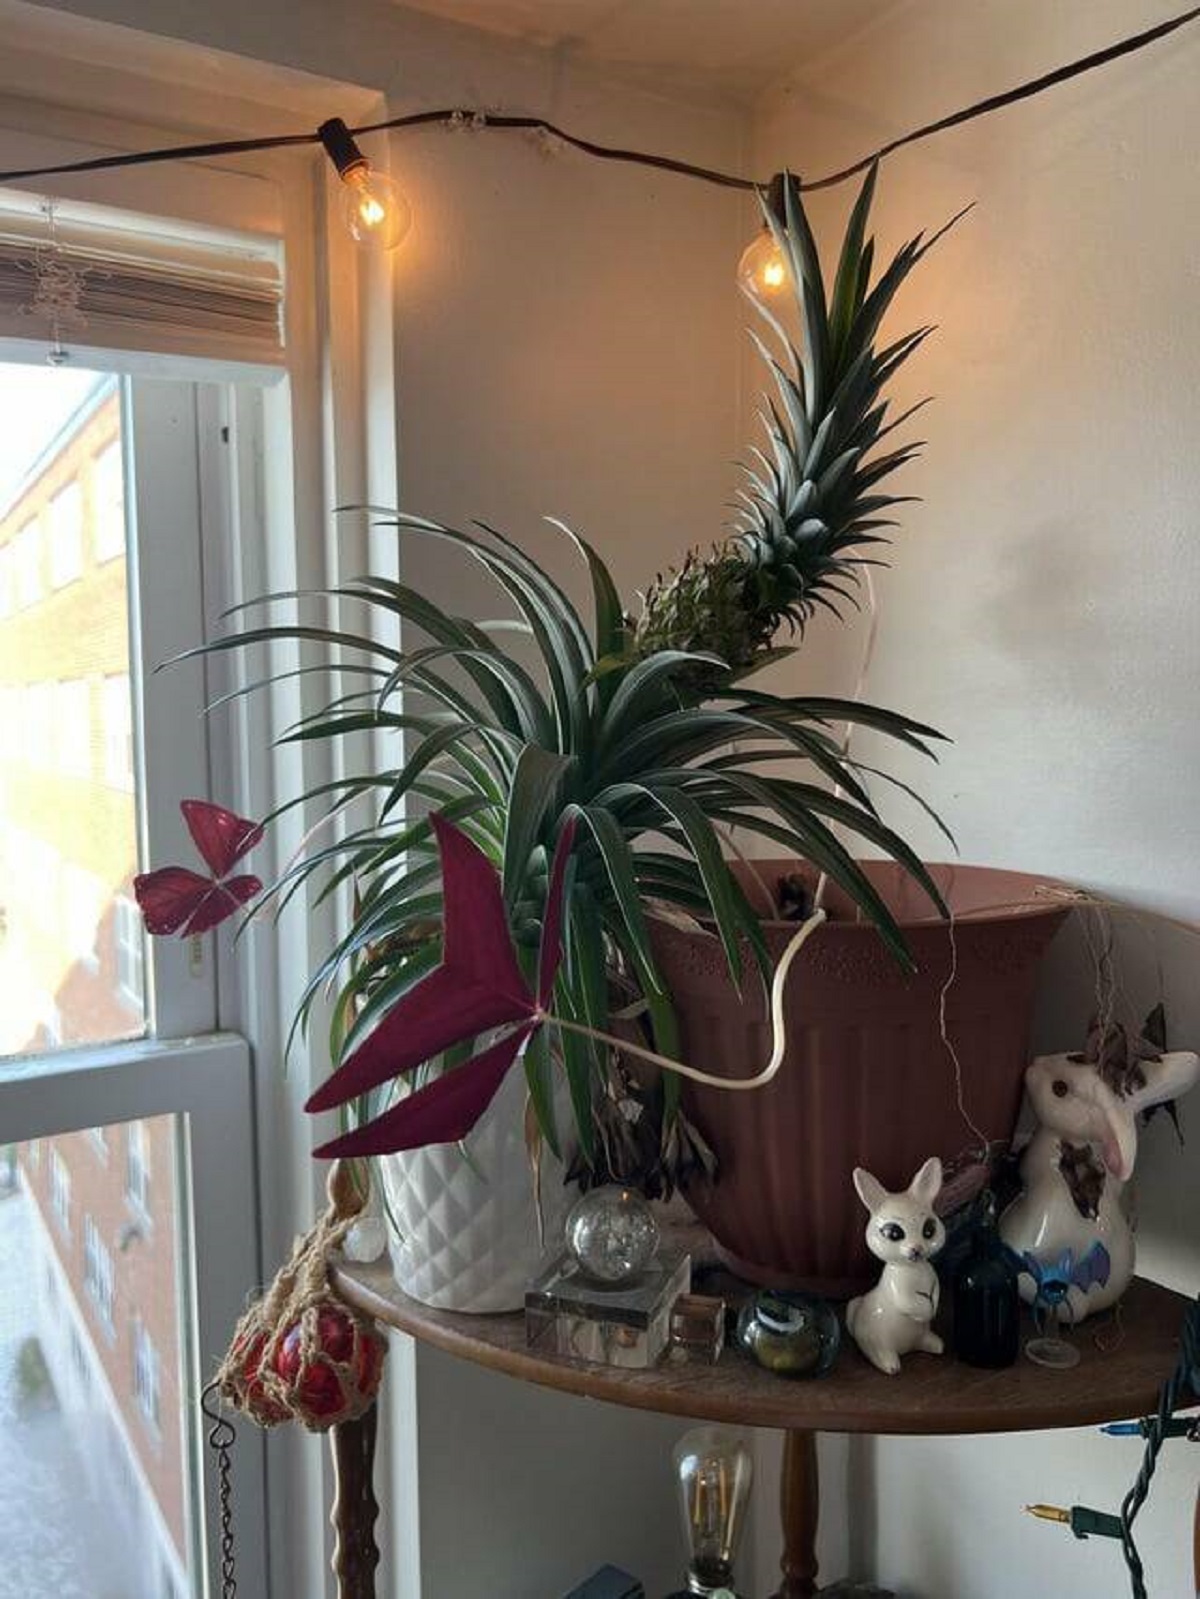 "Normally plants grow toward the light, but my pineapple plant seems to be repulsed by it."